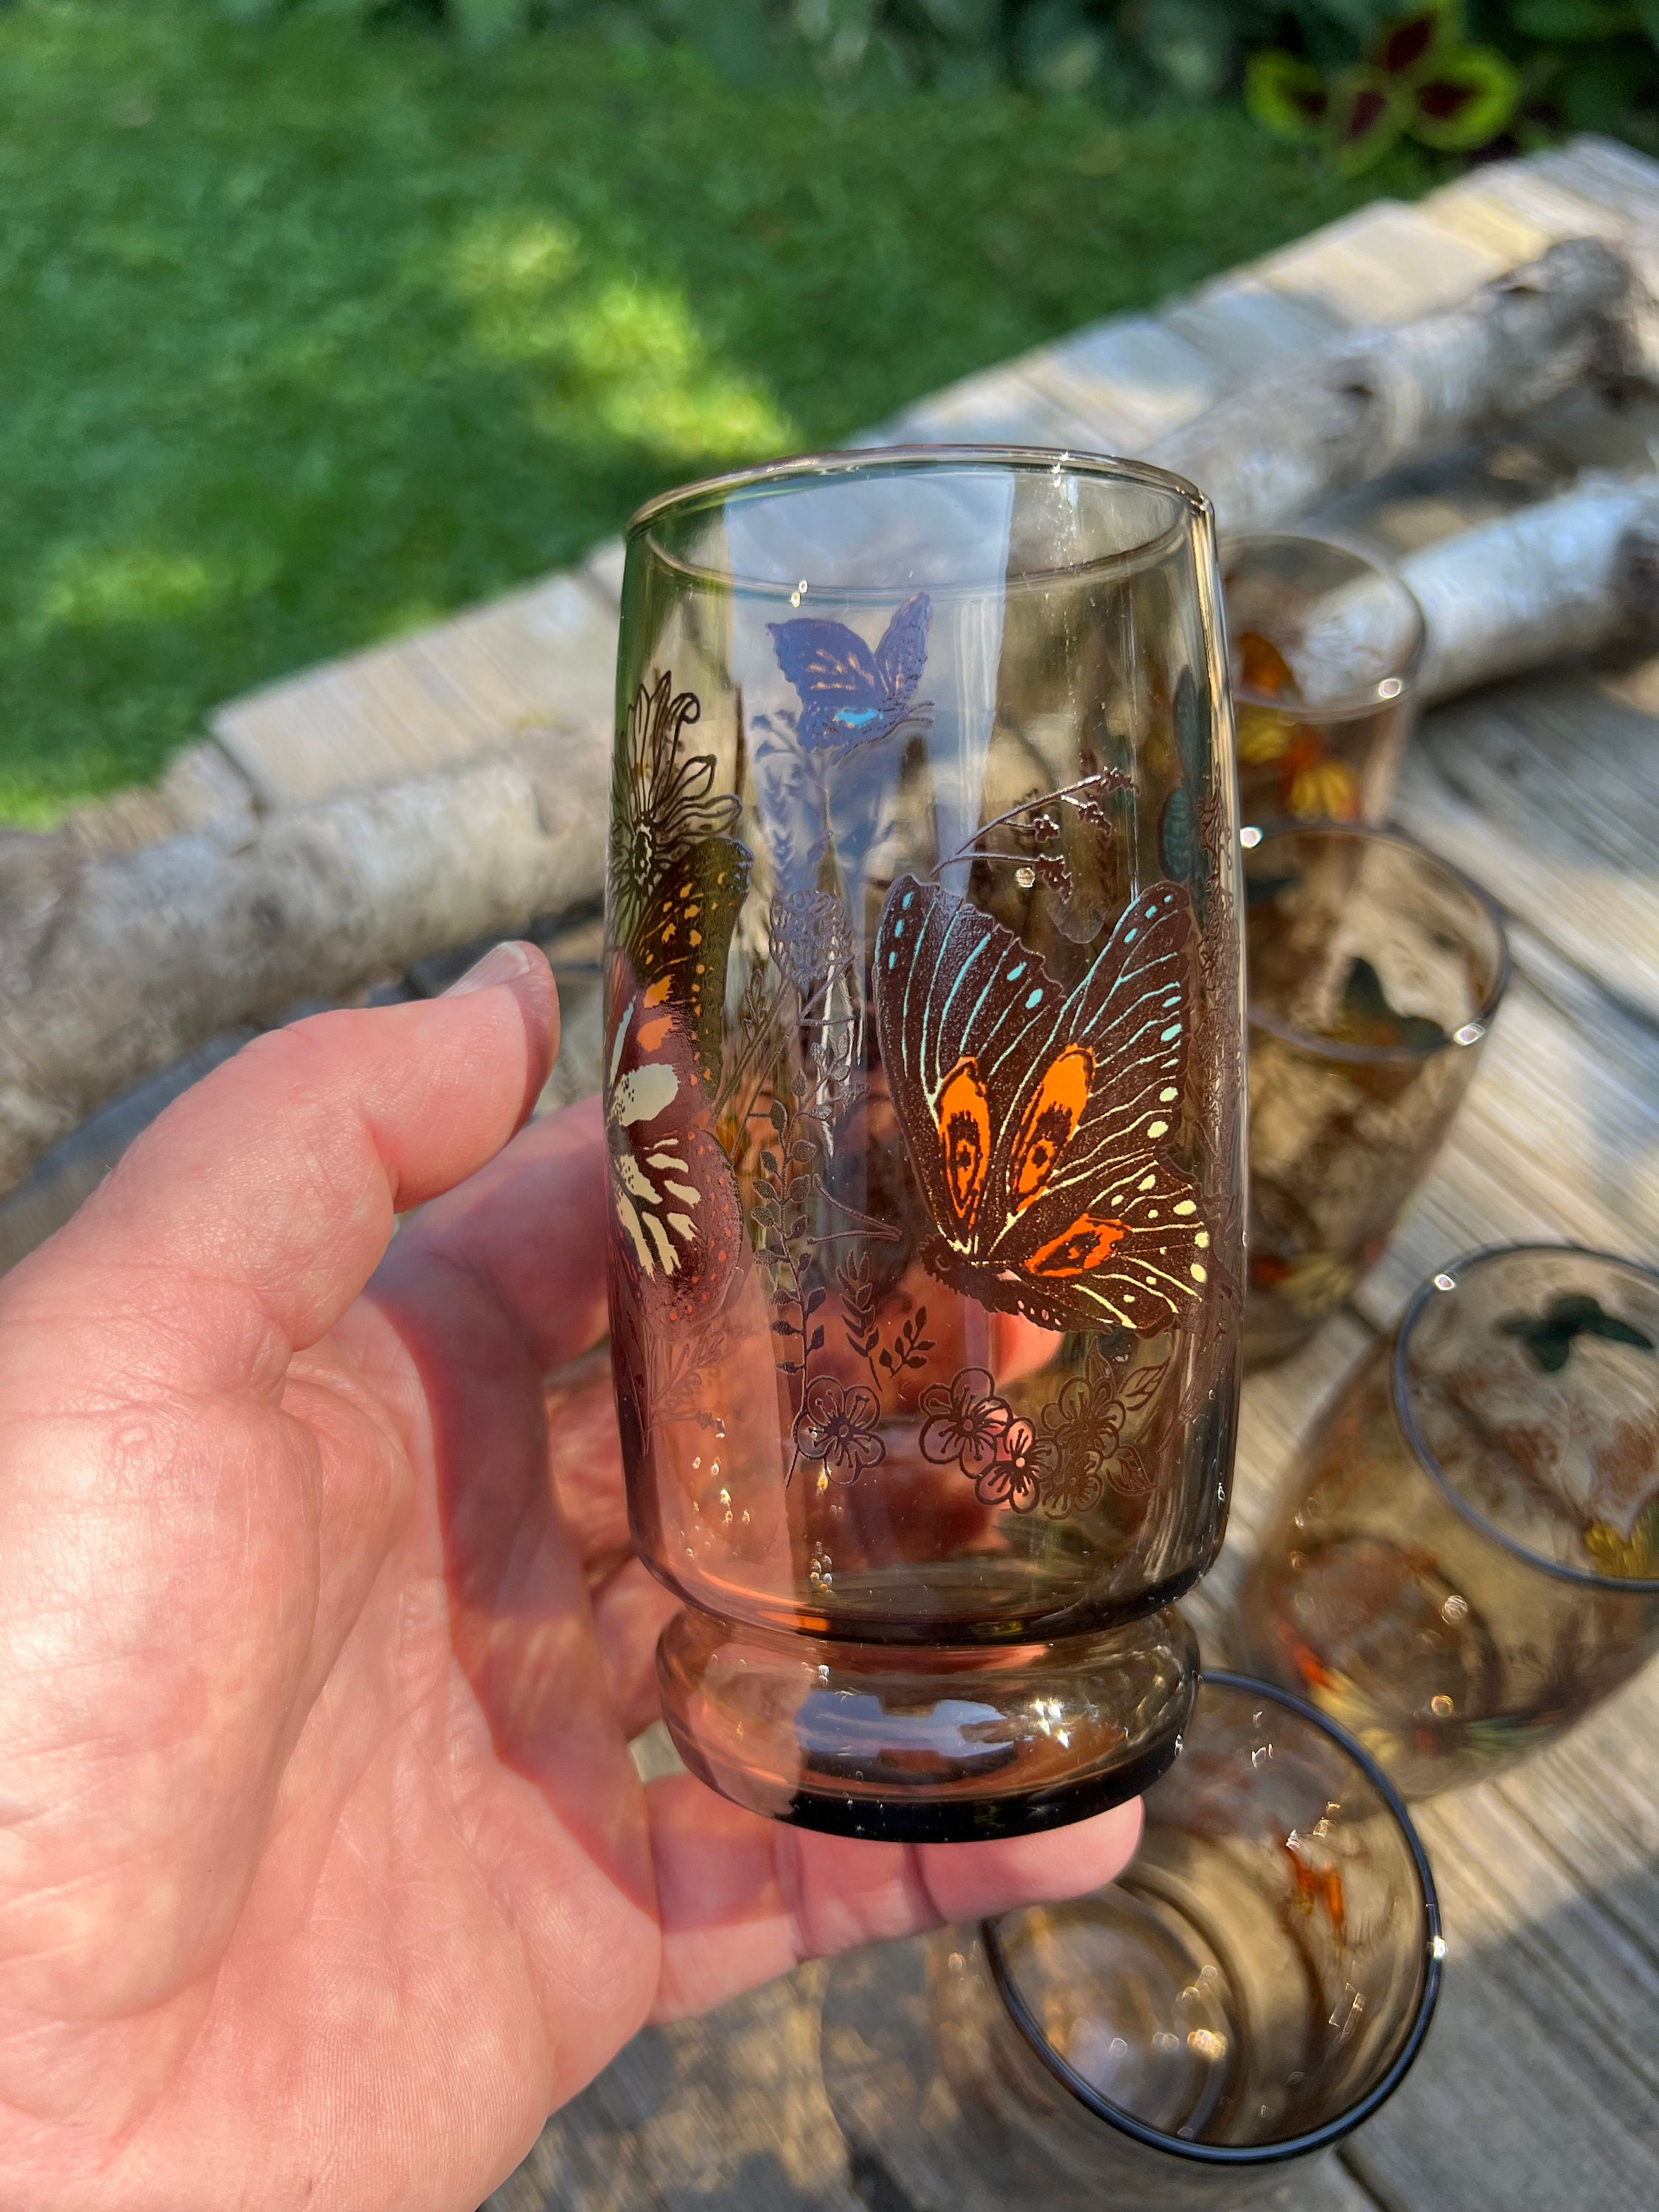 4 Gorgeous Vintage Etched Glass Butterfly High Ball Drinking Glasses